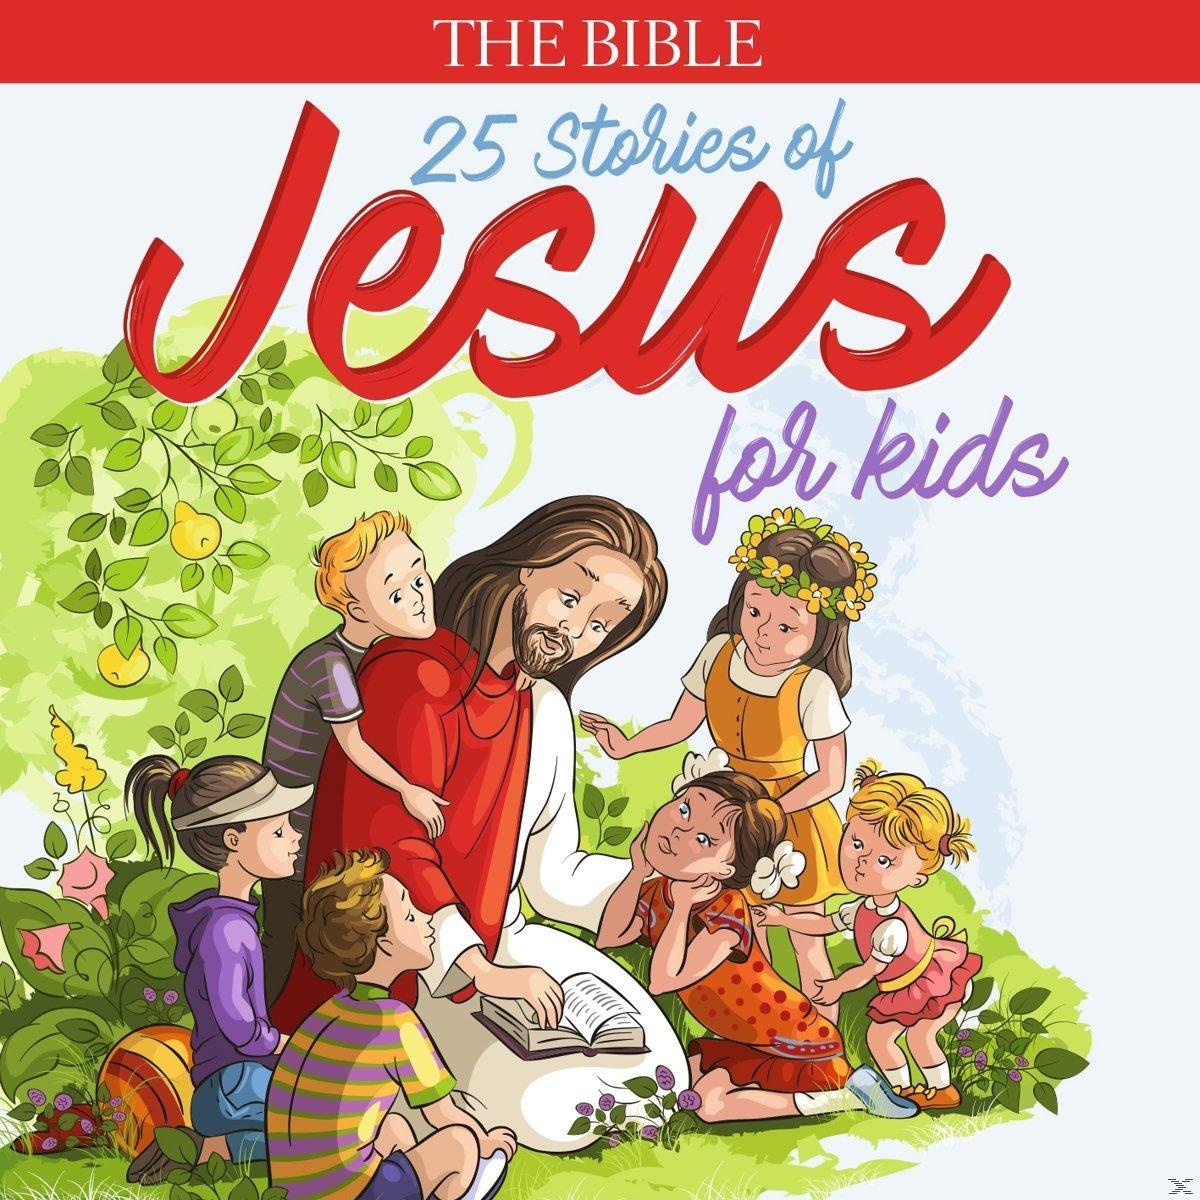 Jesus VARIOUS Kinds The - For - Stories (CD) Of Bible: